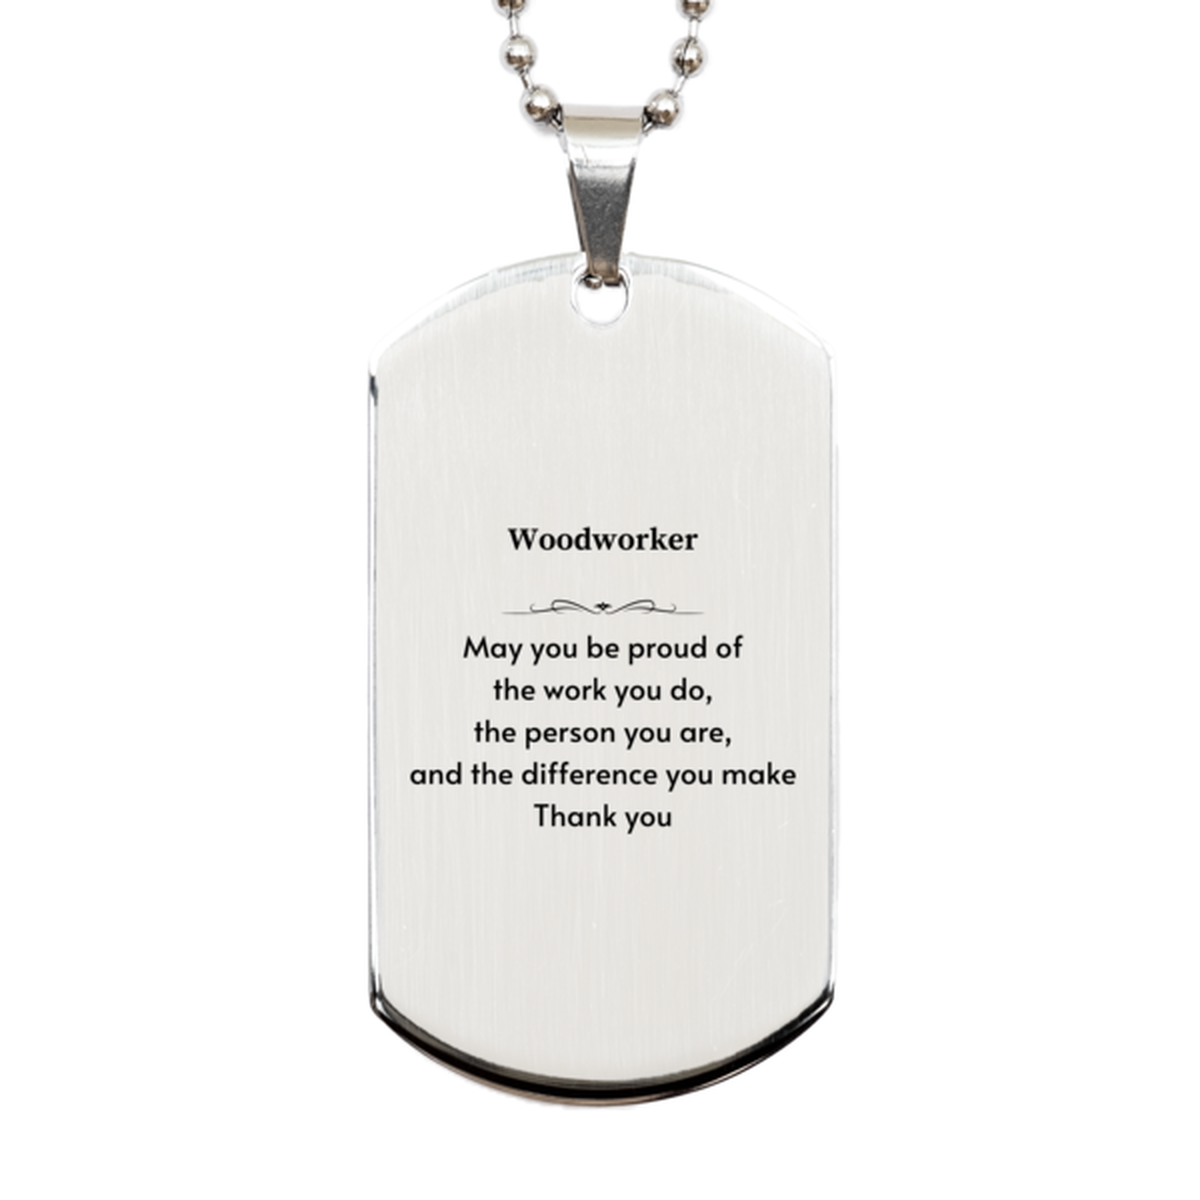 Heartwarming Silver Dog Tag Retirement Coworkers Gifts for Woodworker, Woodworker May You be proud of the work you do, the person you are Gifts for Boss Men Women Friends